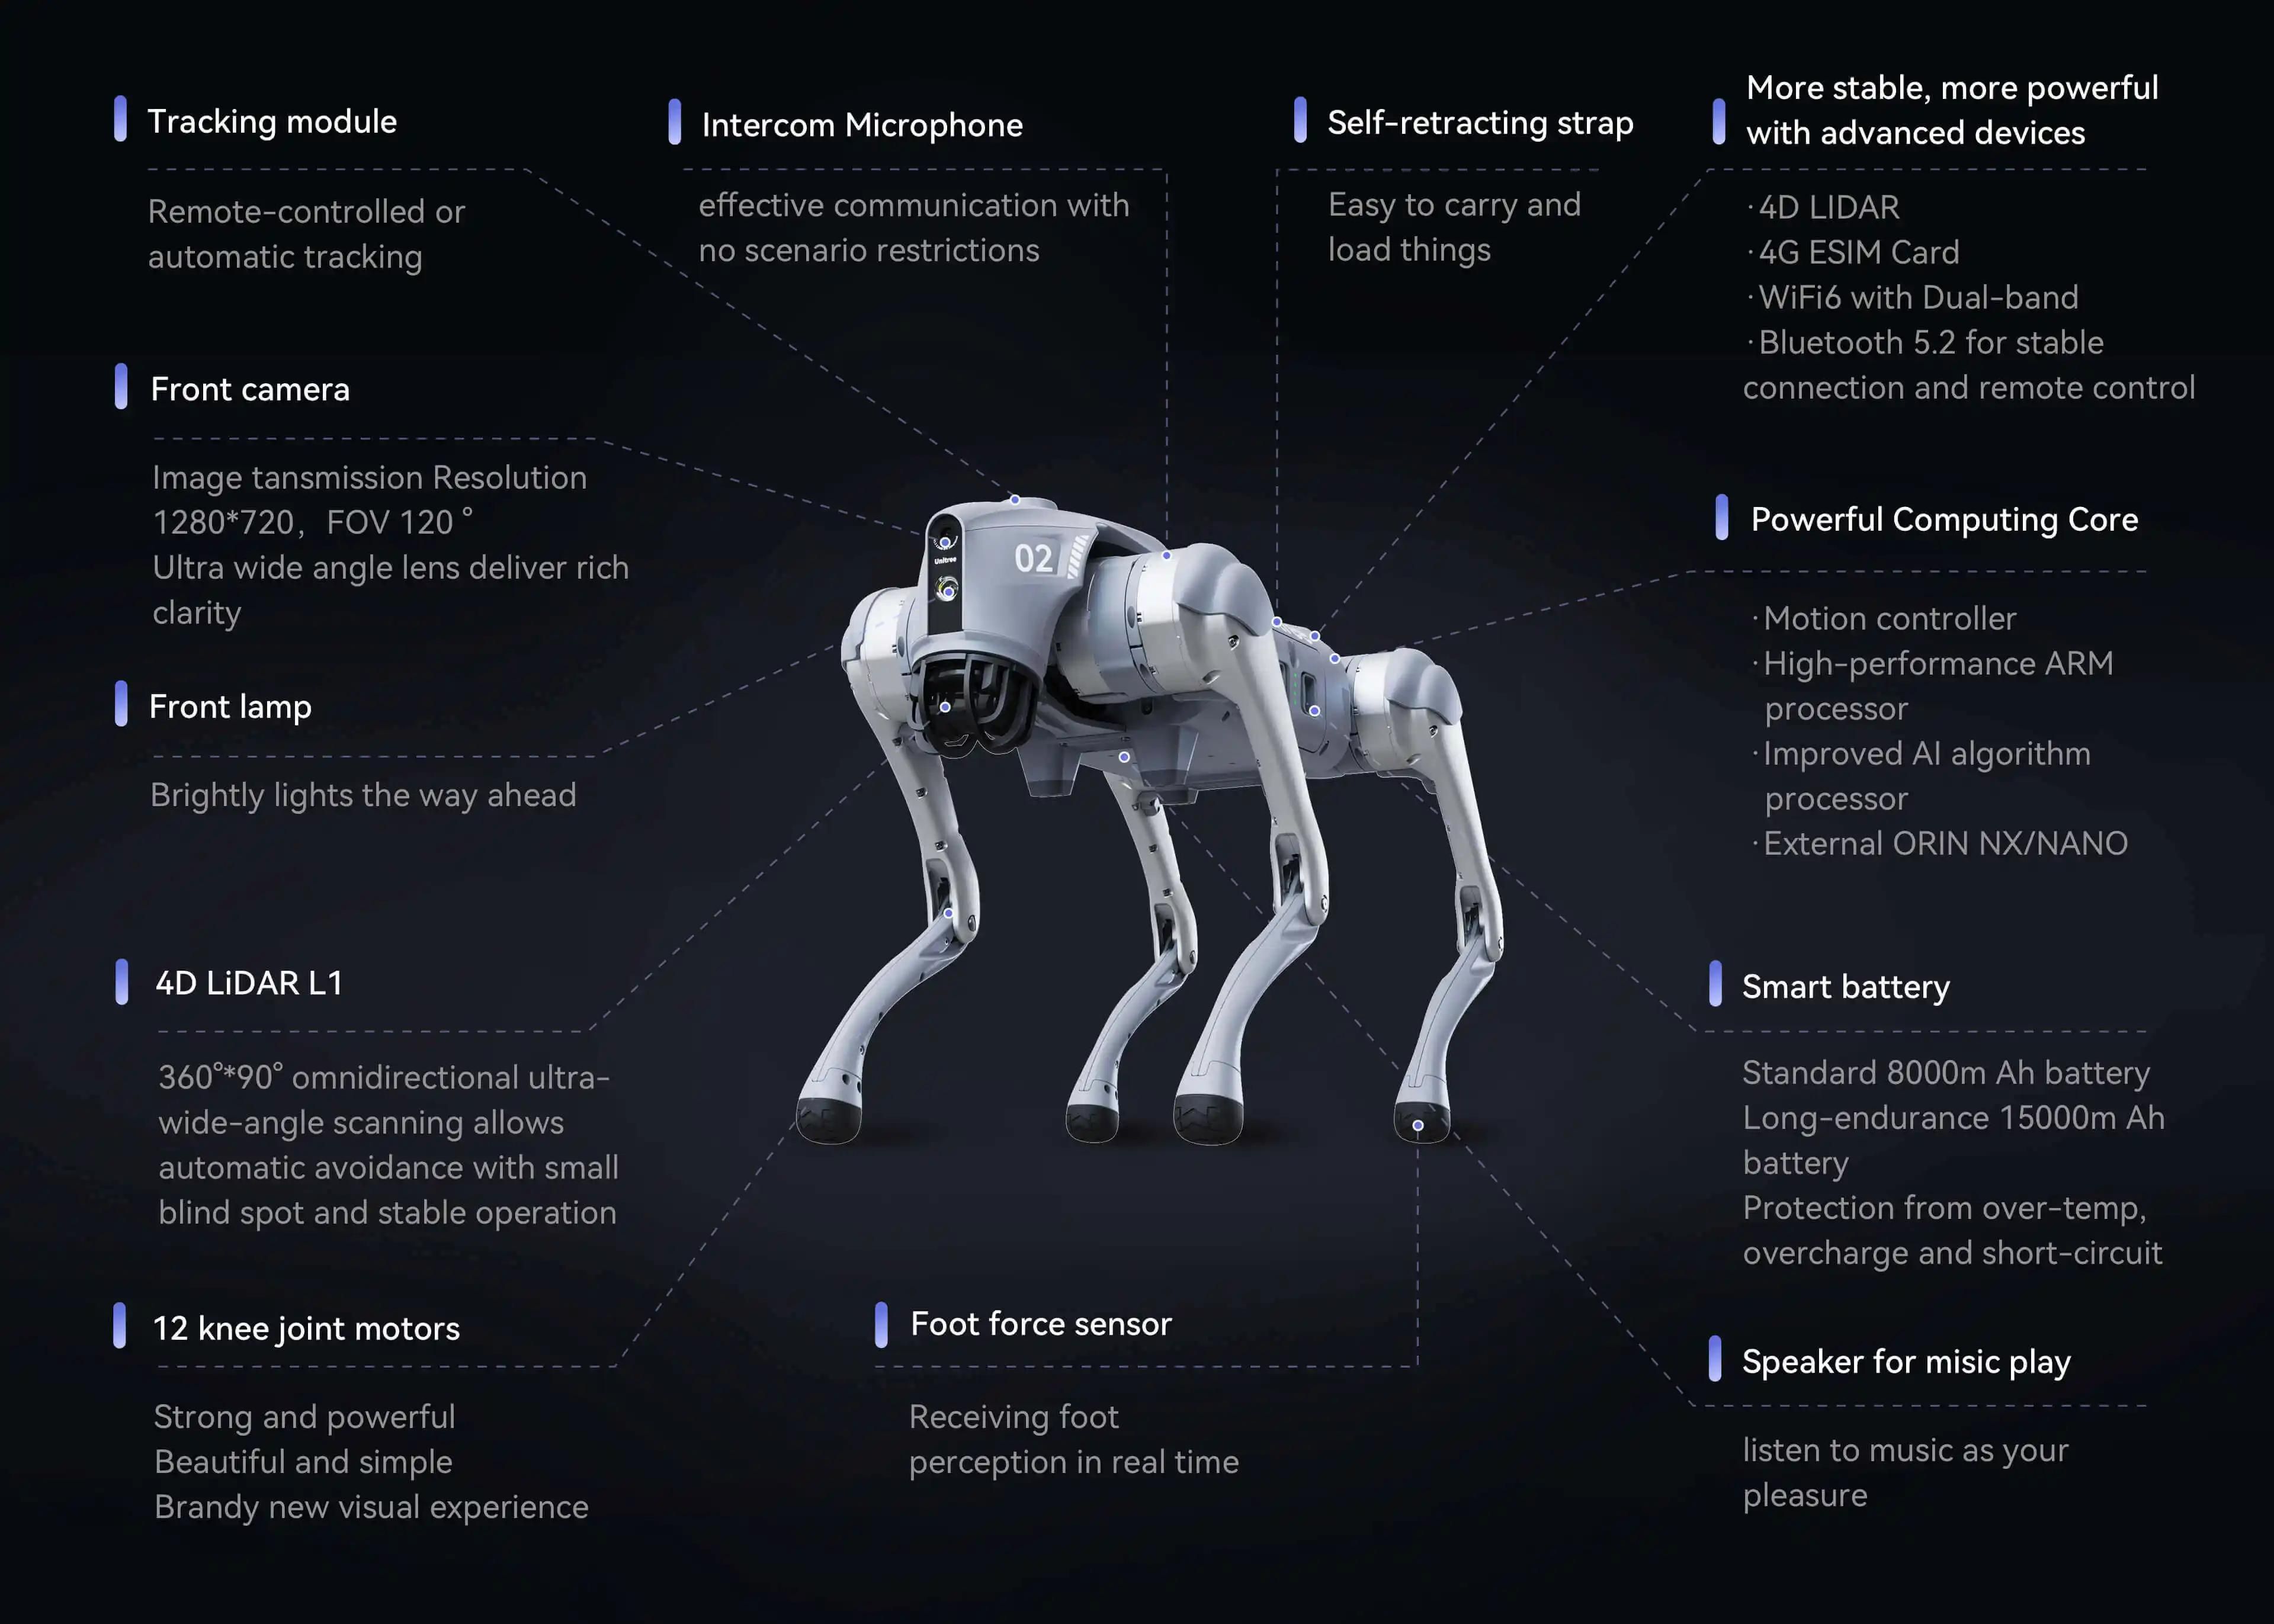 Key features of the Go2 Air robot